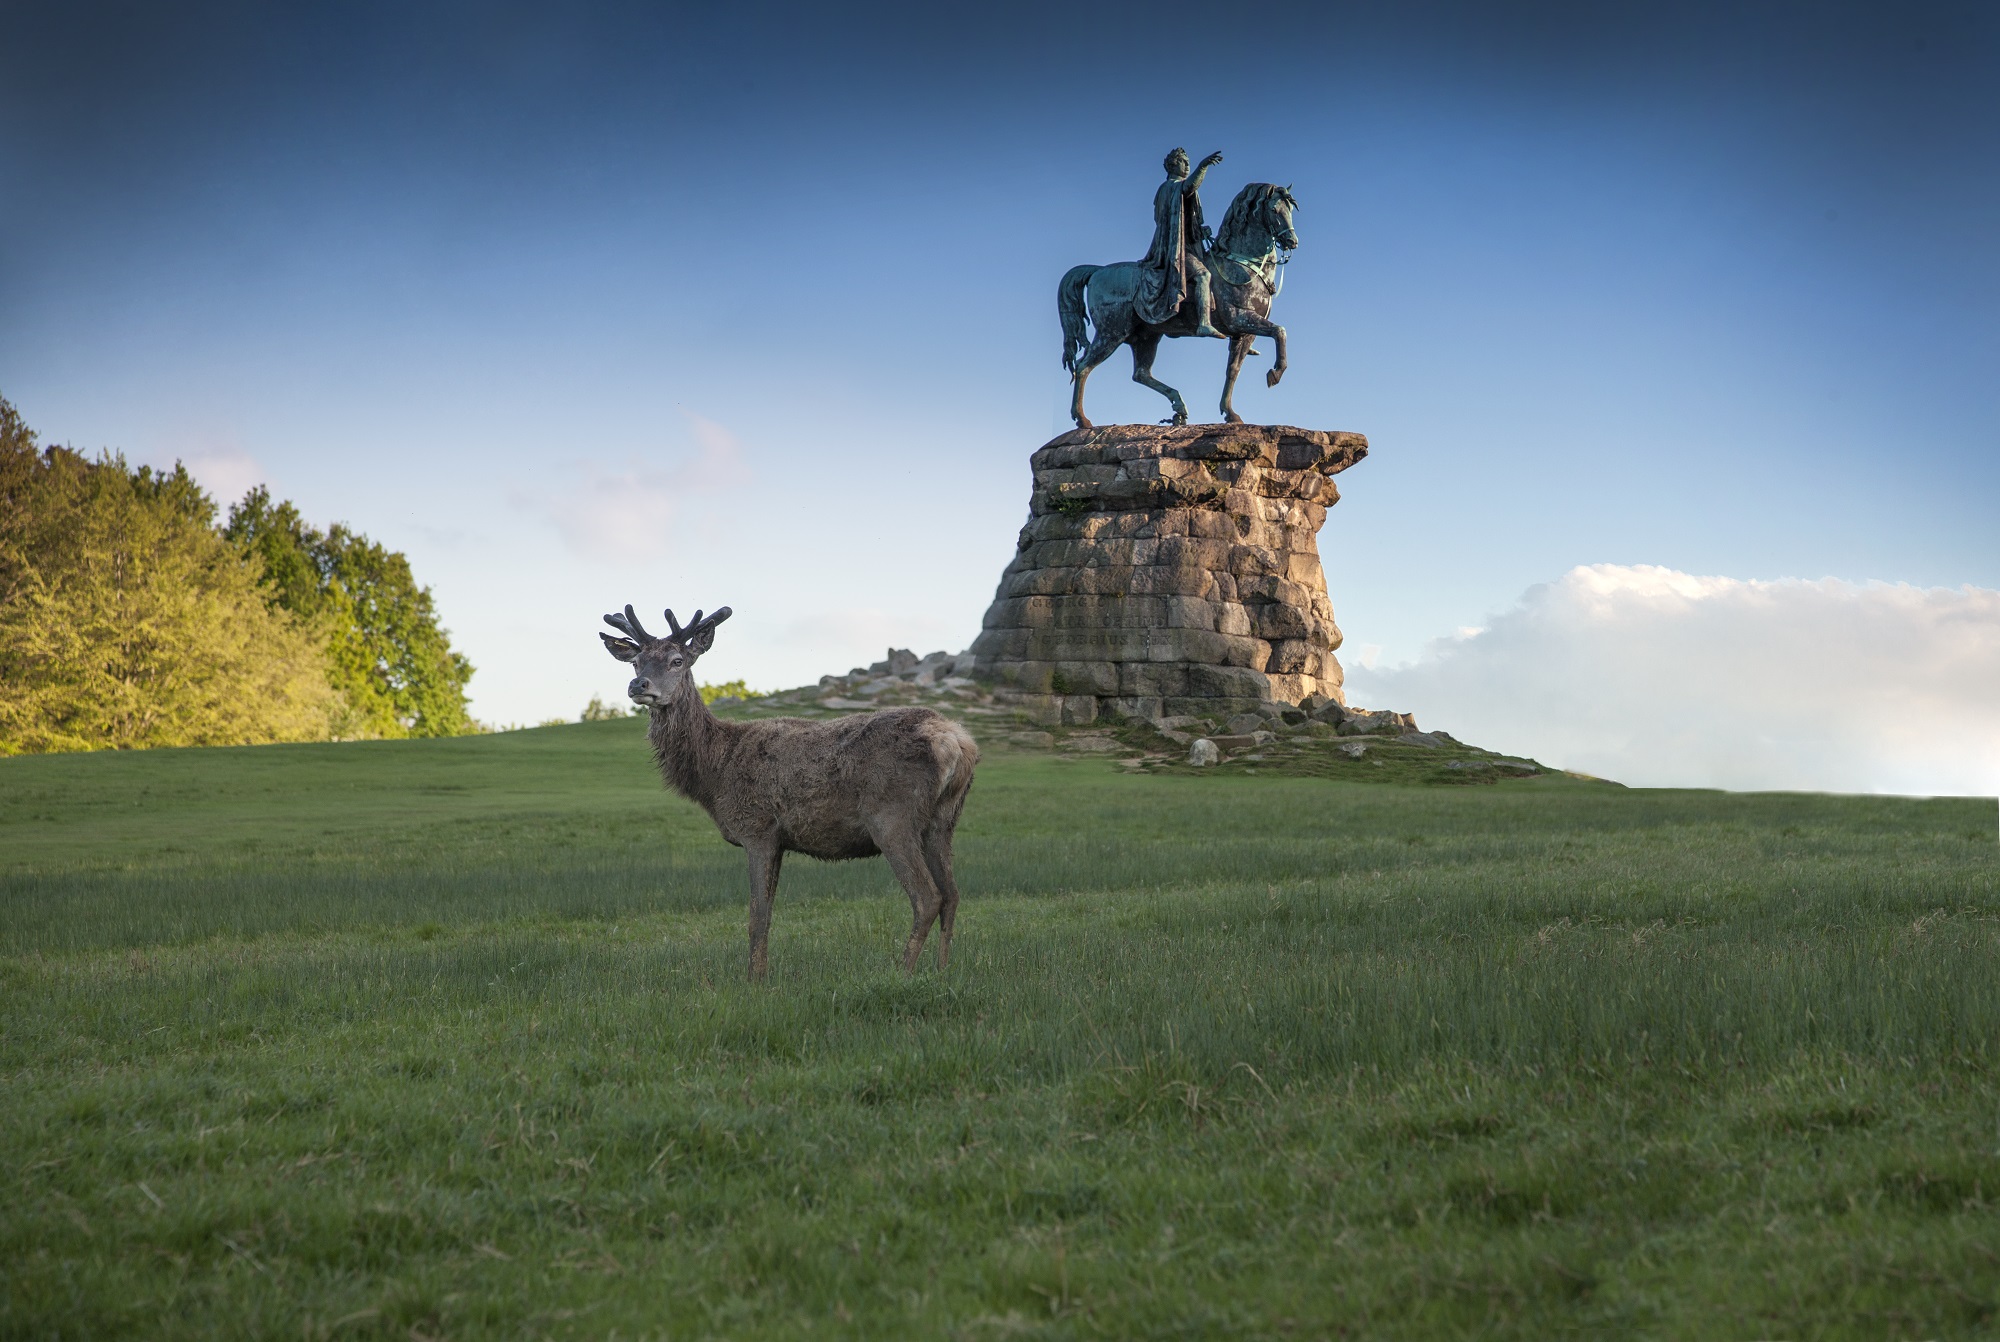 A Stag in the Deer Park with The Copper Horse in the background.